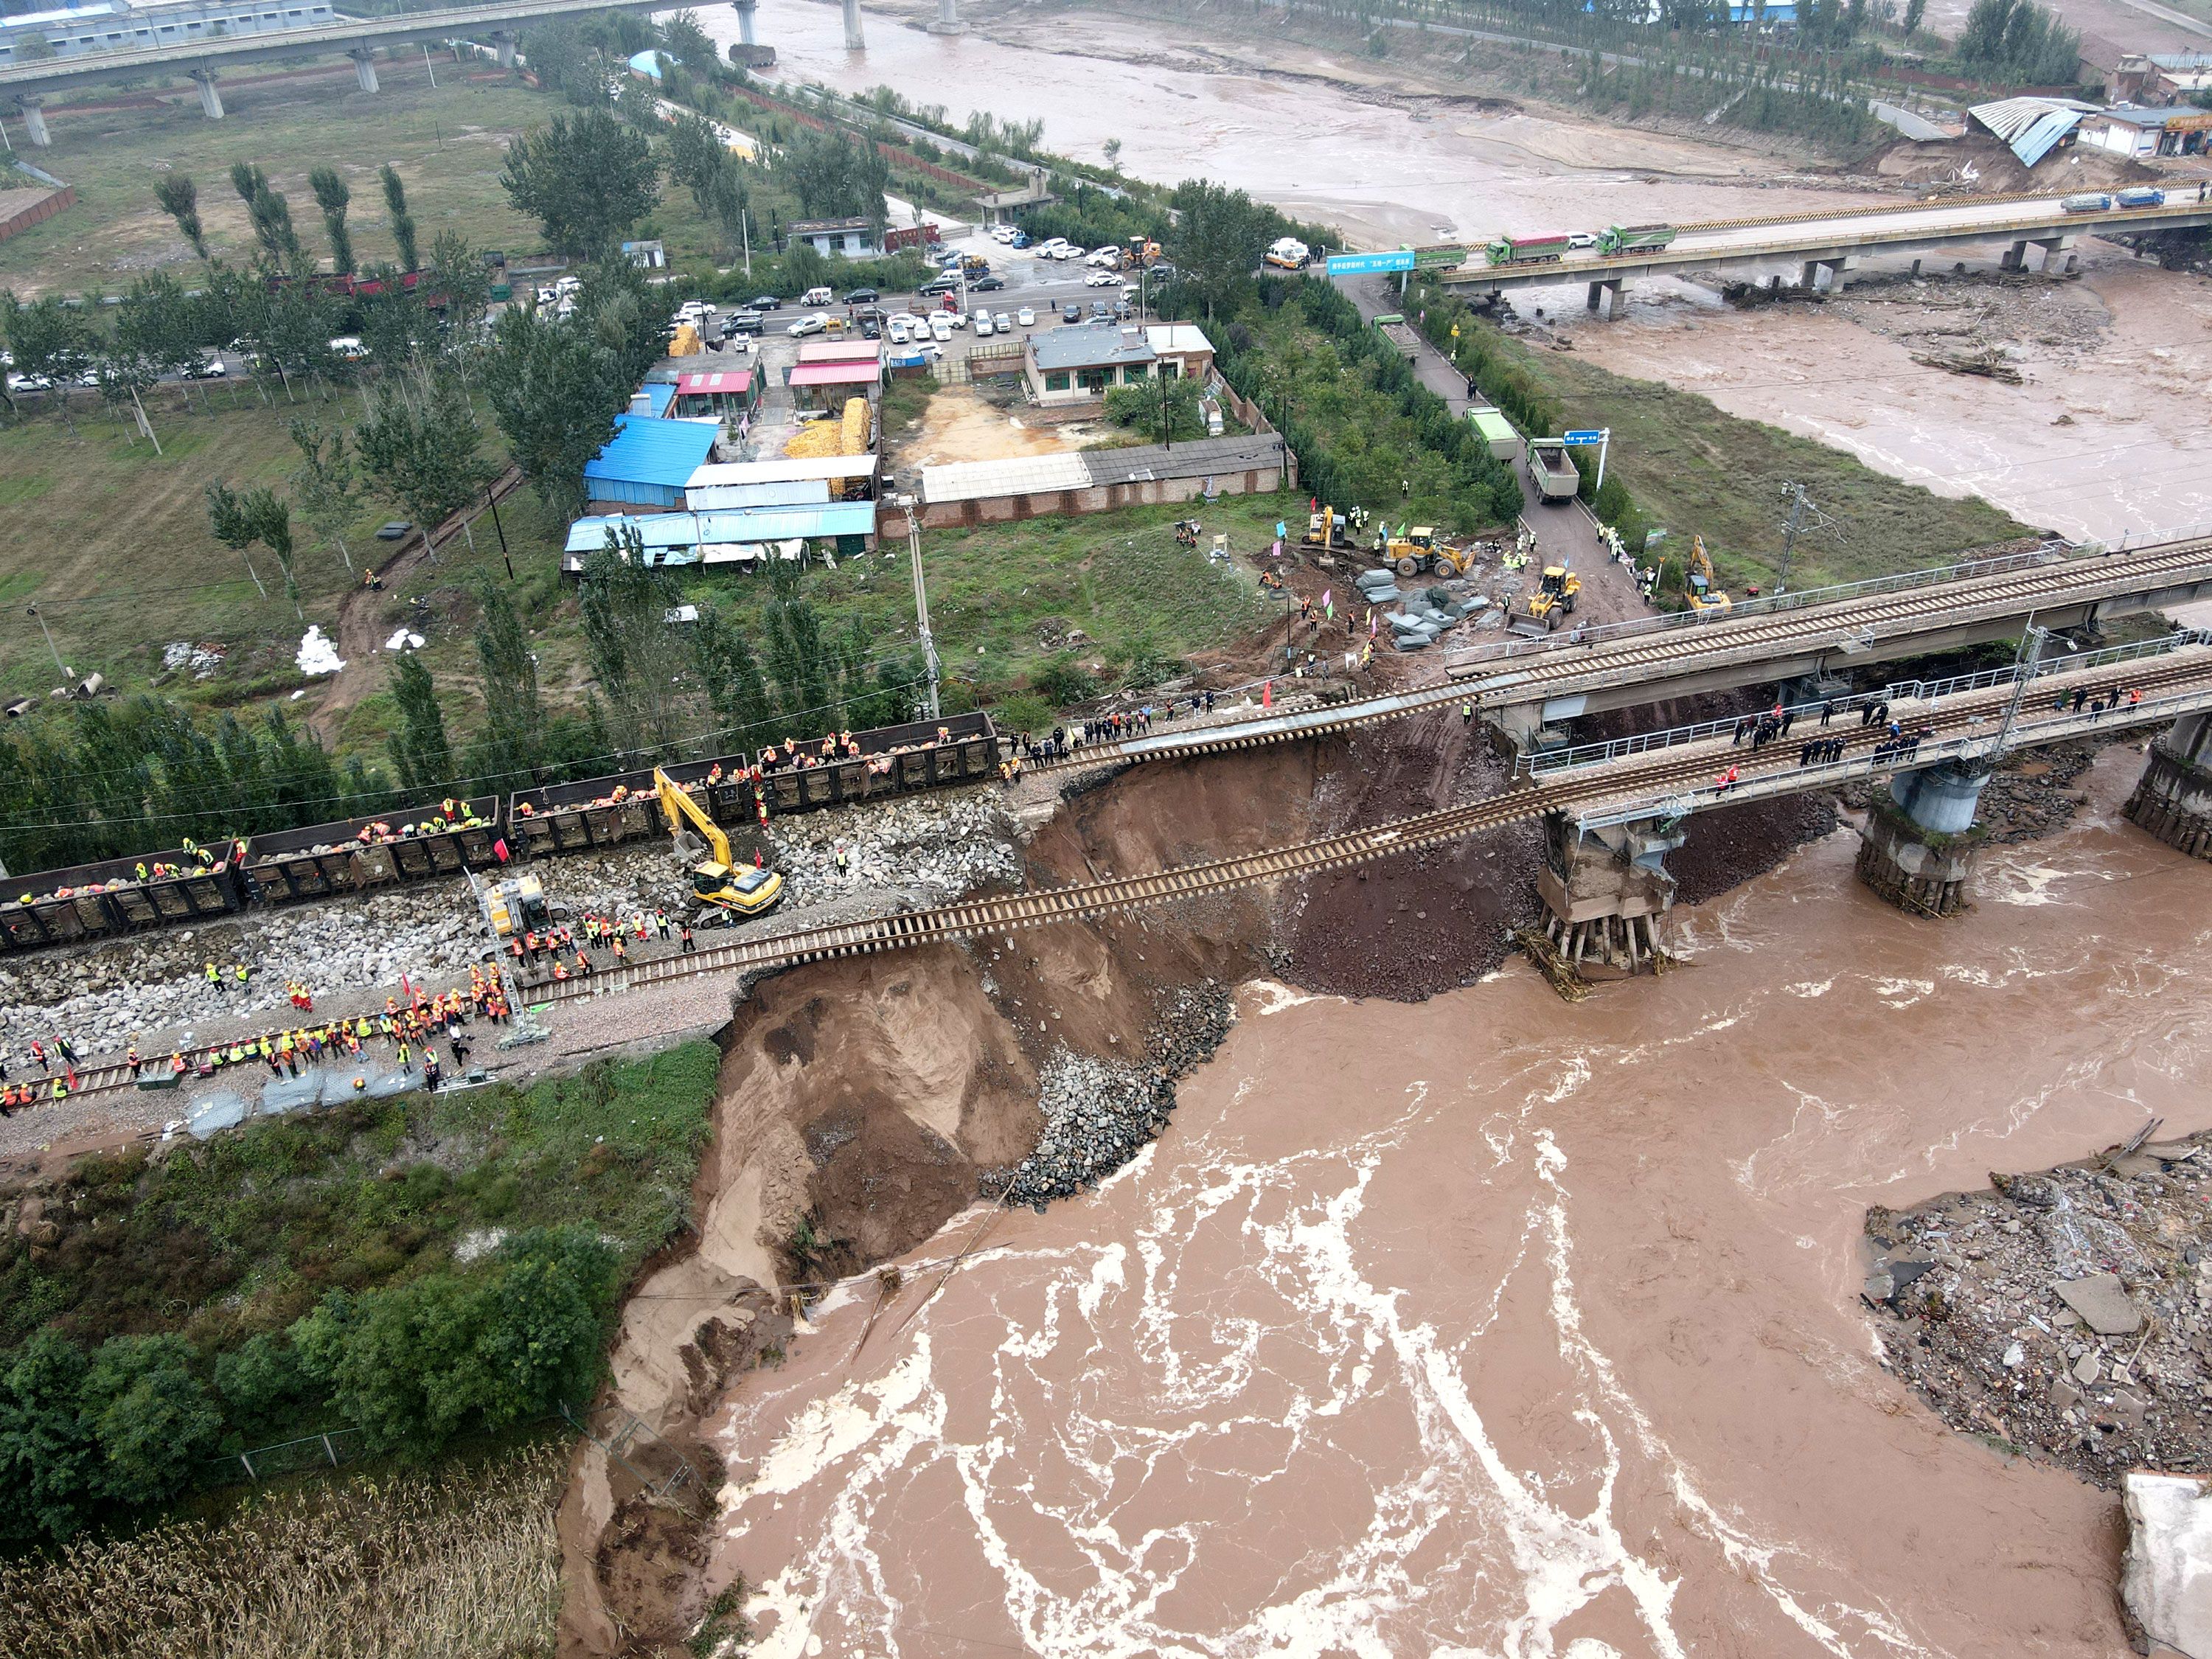 China flooding: At least 15 dead after heavy rainfall and flooding in Shanxi province | CNN